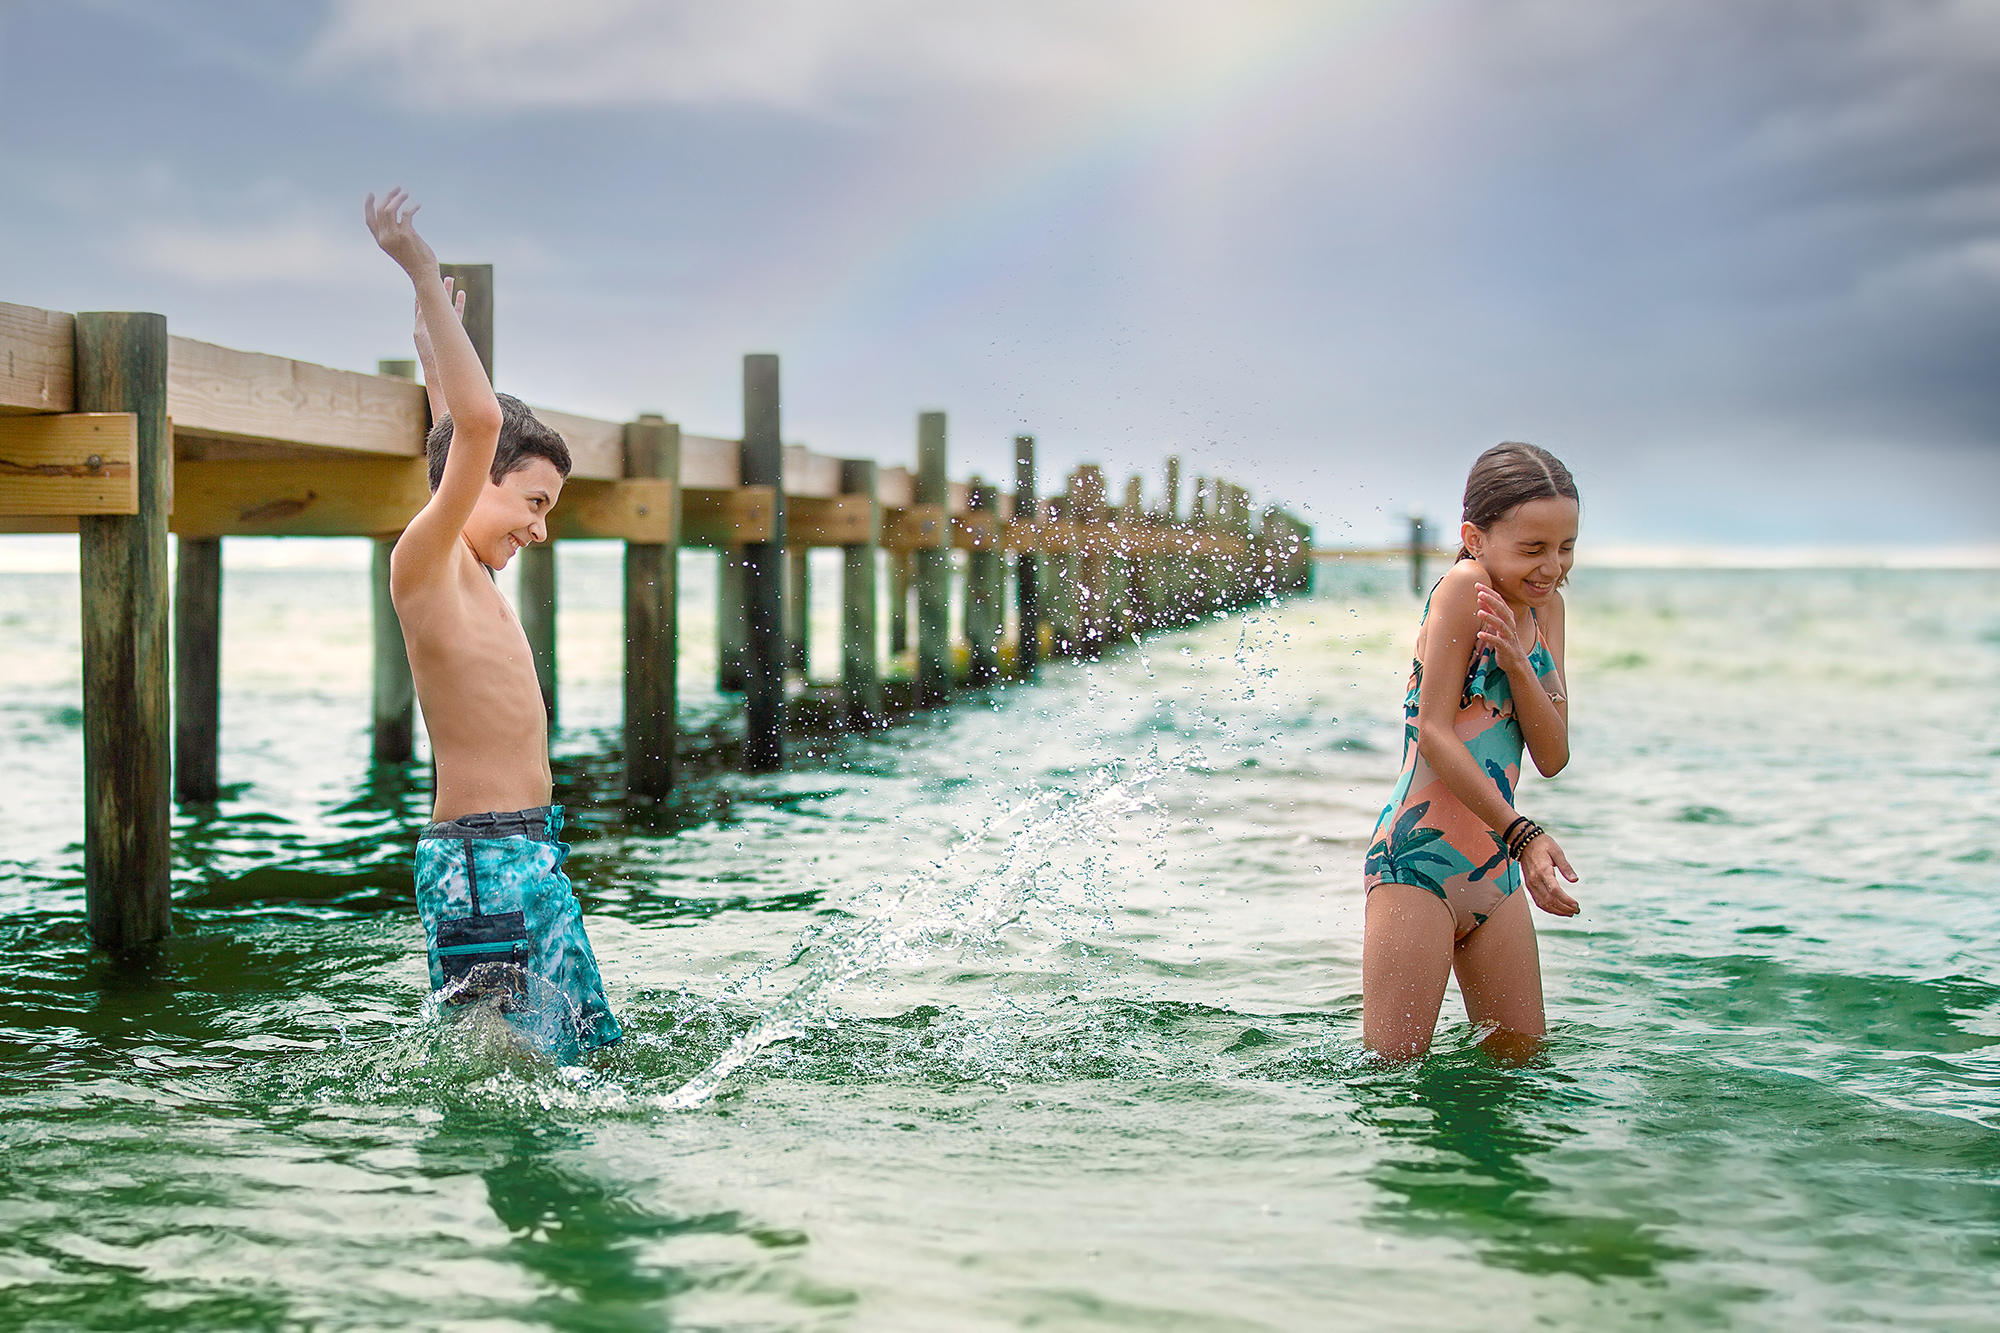 Boy and girl splashing water with a wooden pier in the background